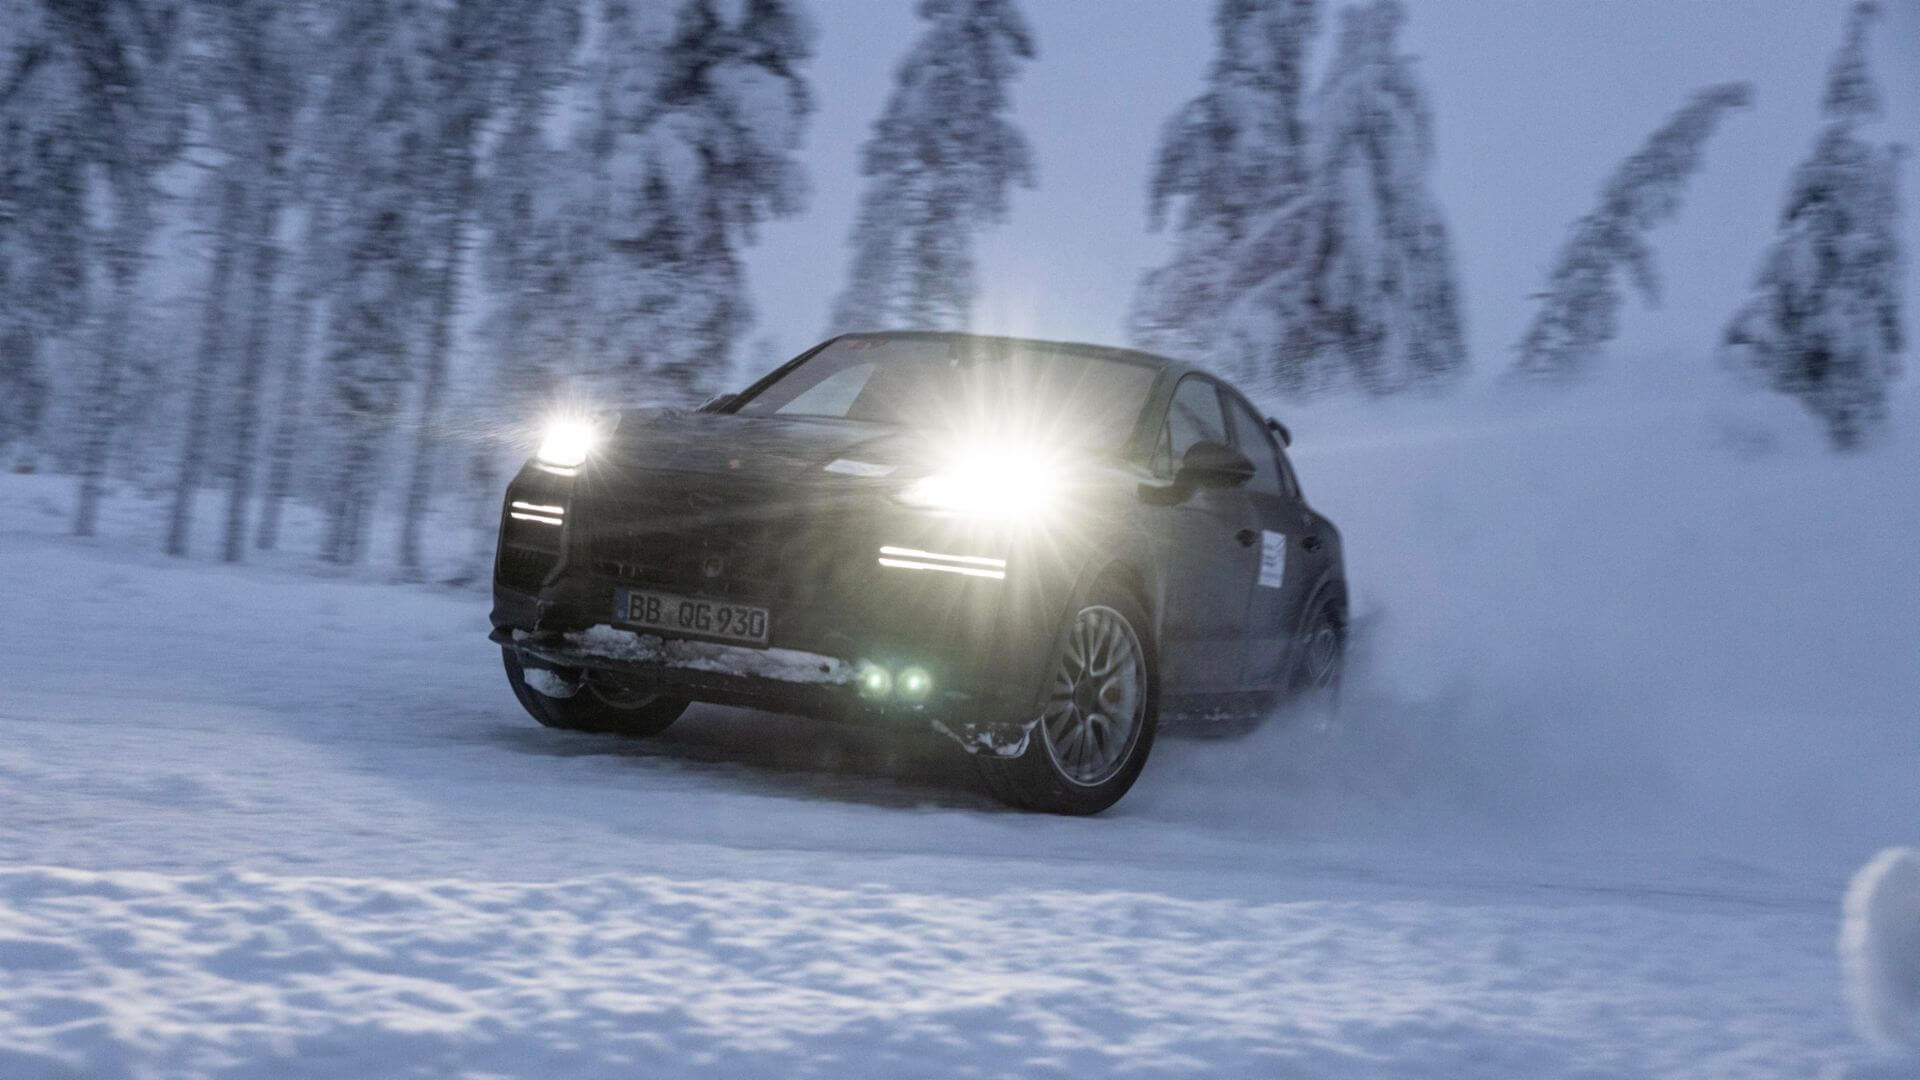 The New Porsche Cayenne is Almost Here: 2.5 Milion Miles of Testing Before Launch